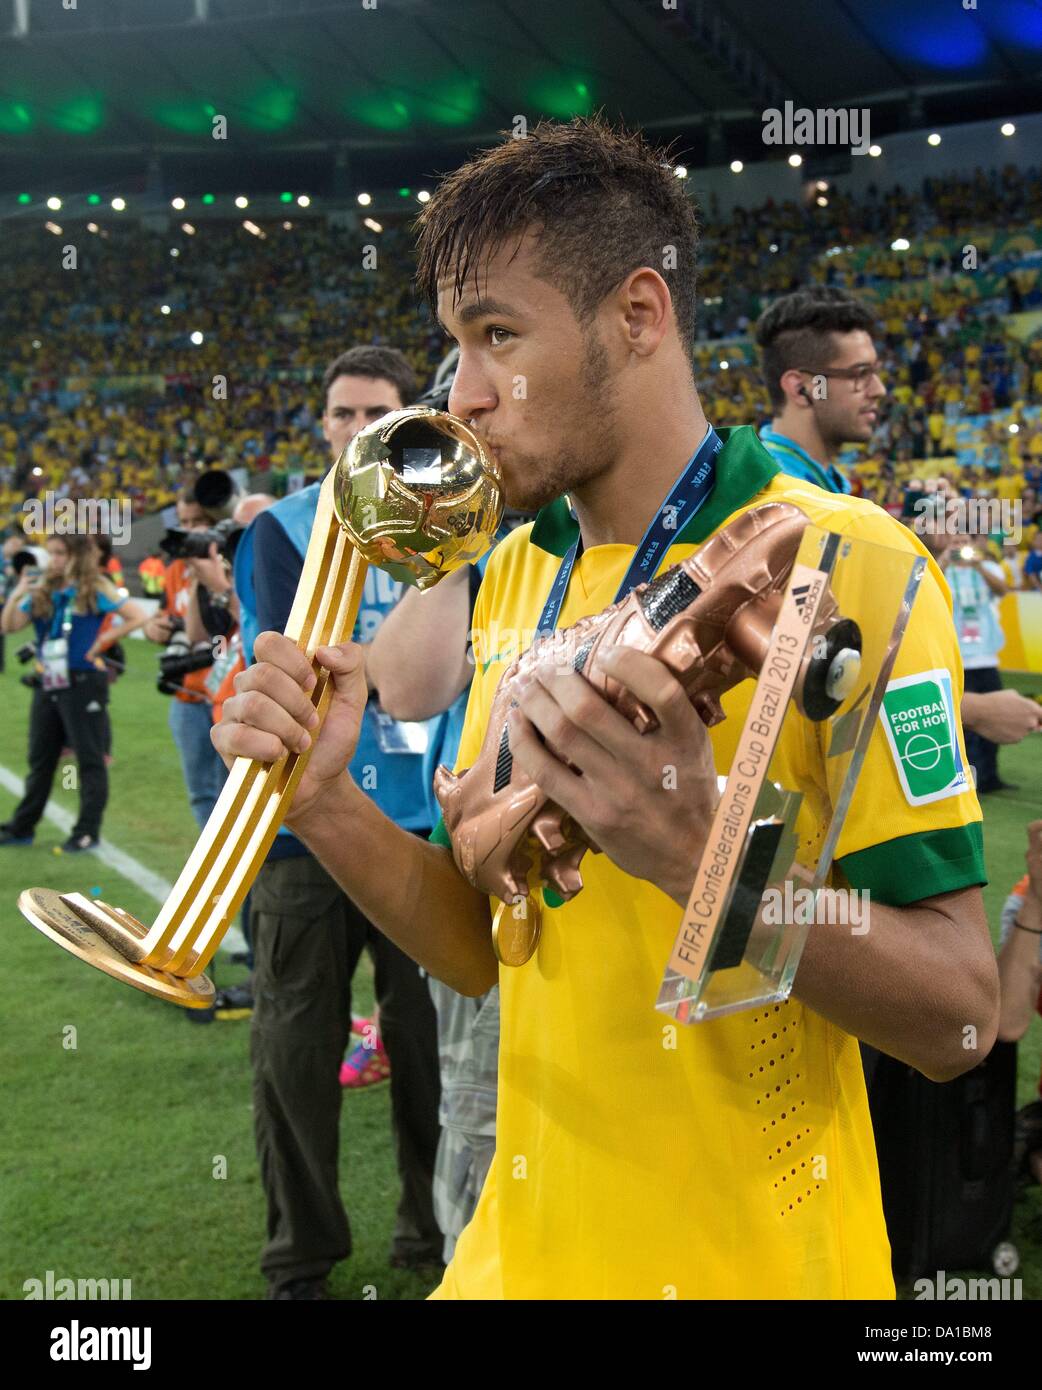 Rio de Janeiro, Brazil. 30 June 2013, Confederations Cup final, Brazil v Spain 3-0: Neymar with the best player trophy. Credit:  dpa picture alliance/Alamy Live News Stock Photo